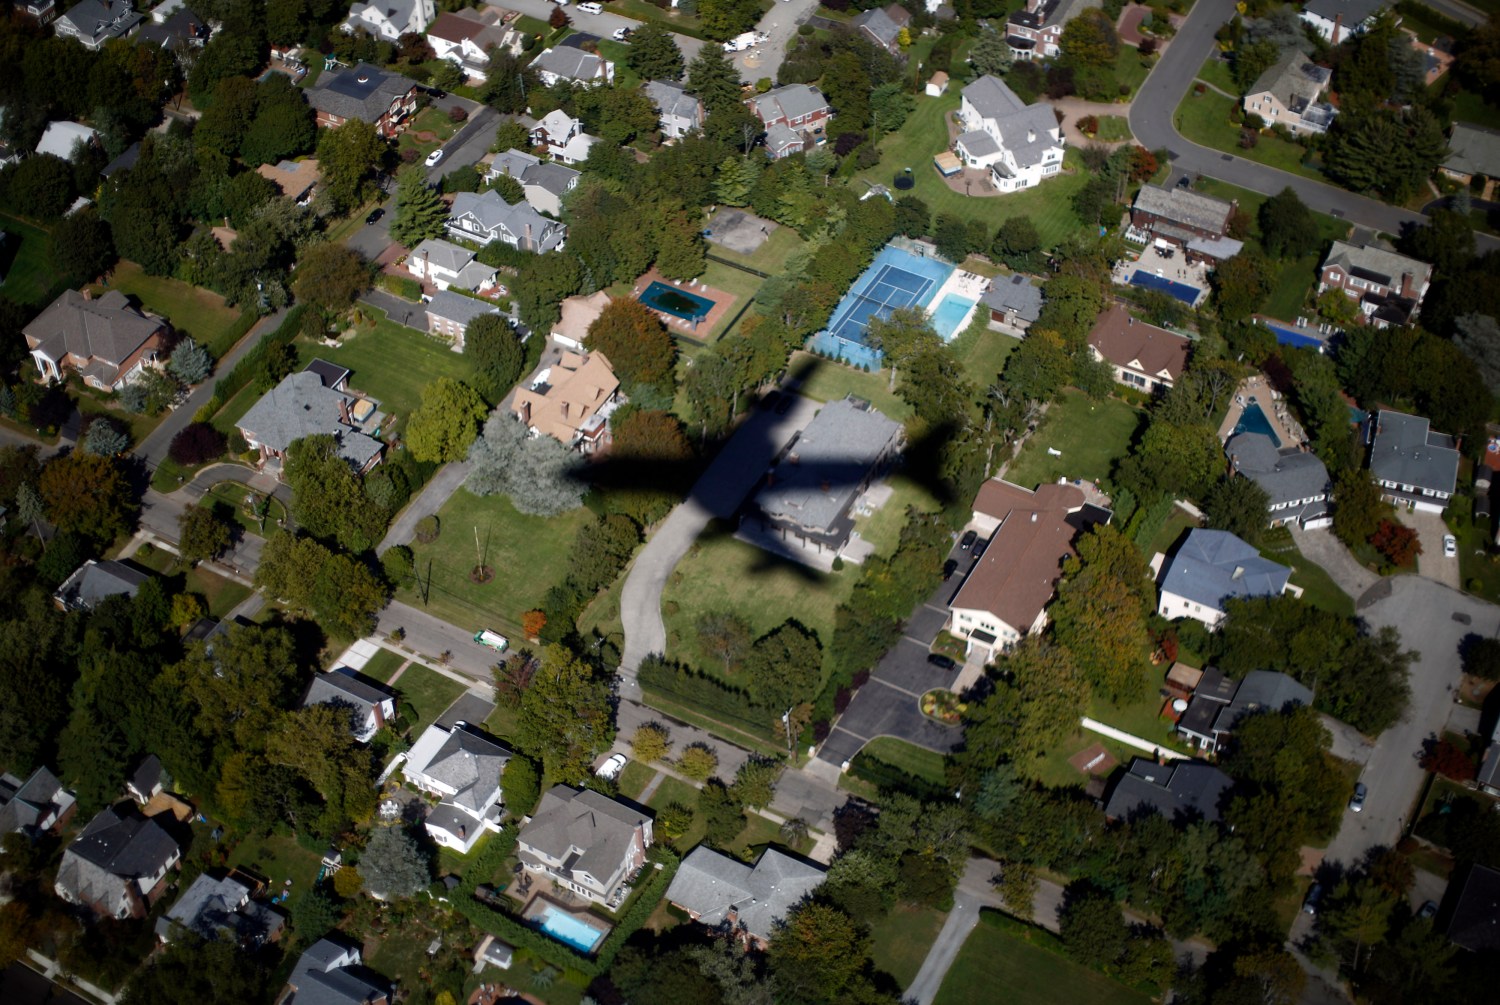 Air Force One flies over suburban Long Island as U.S. President Barack Obama arrives in New York